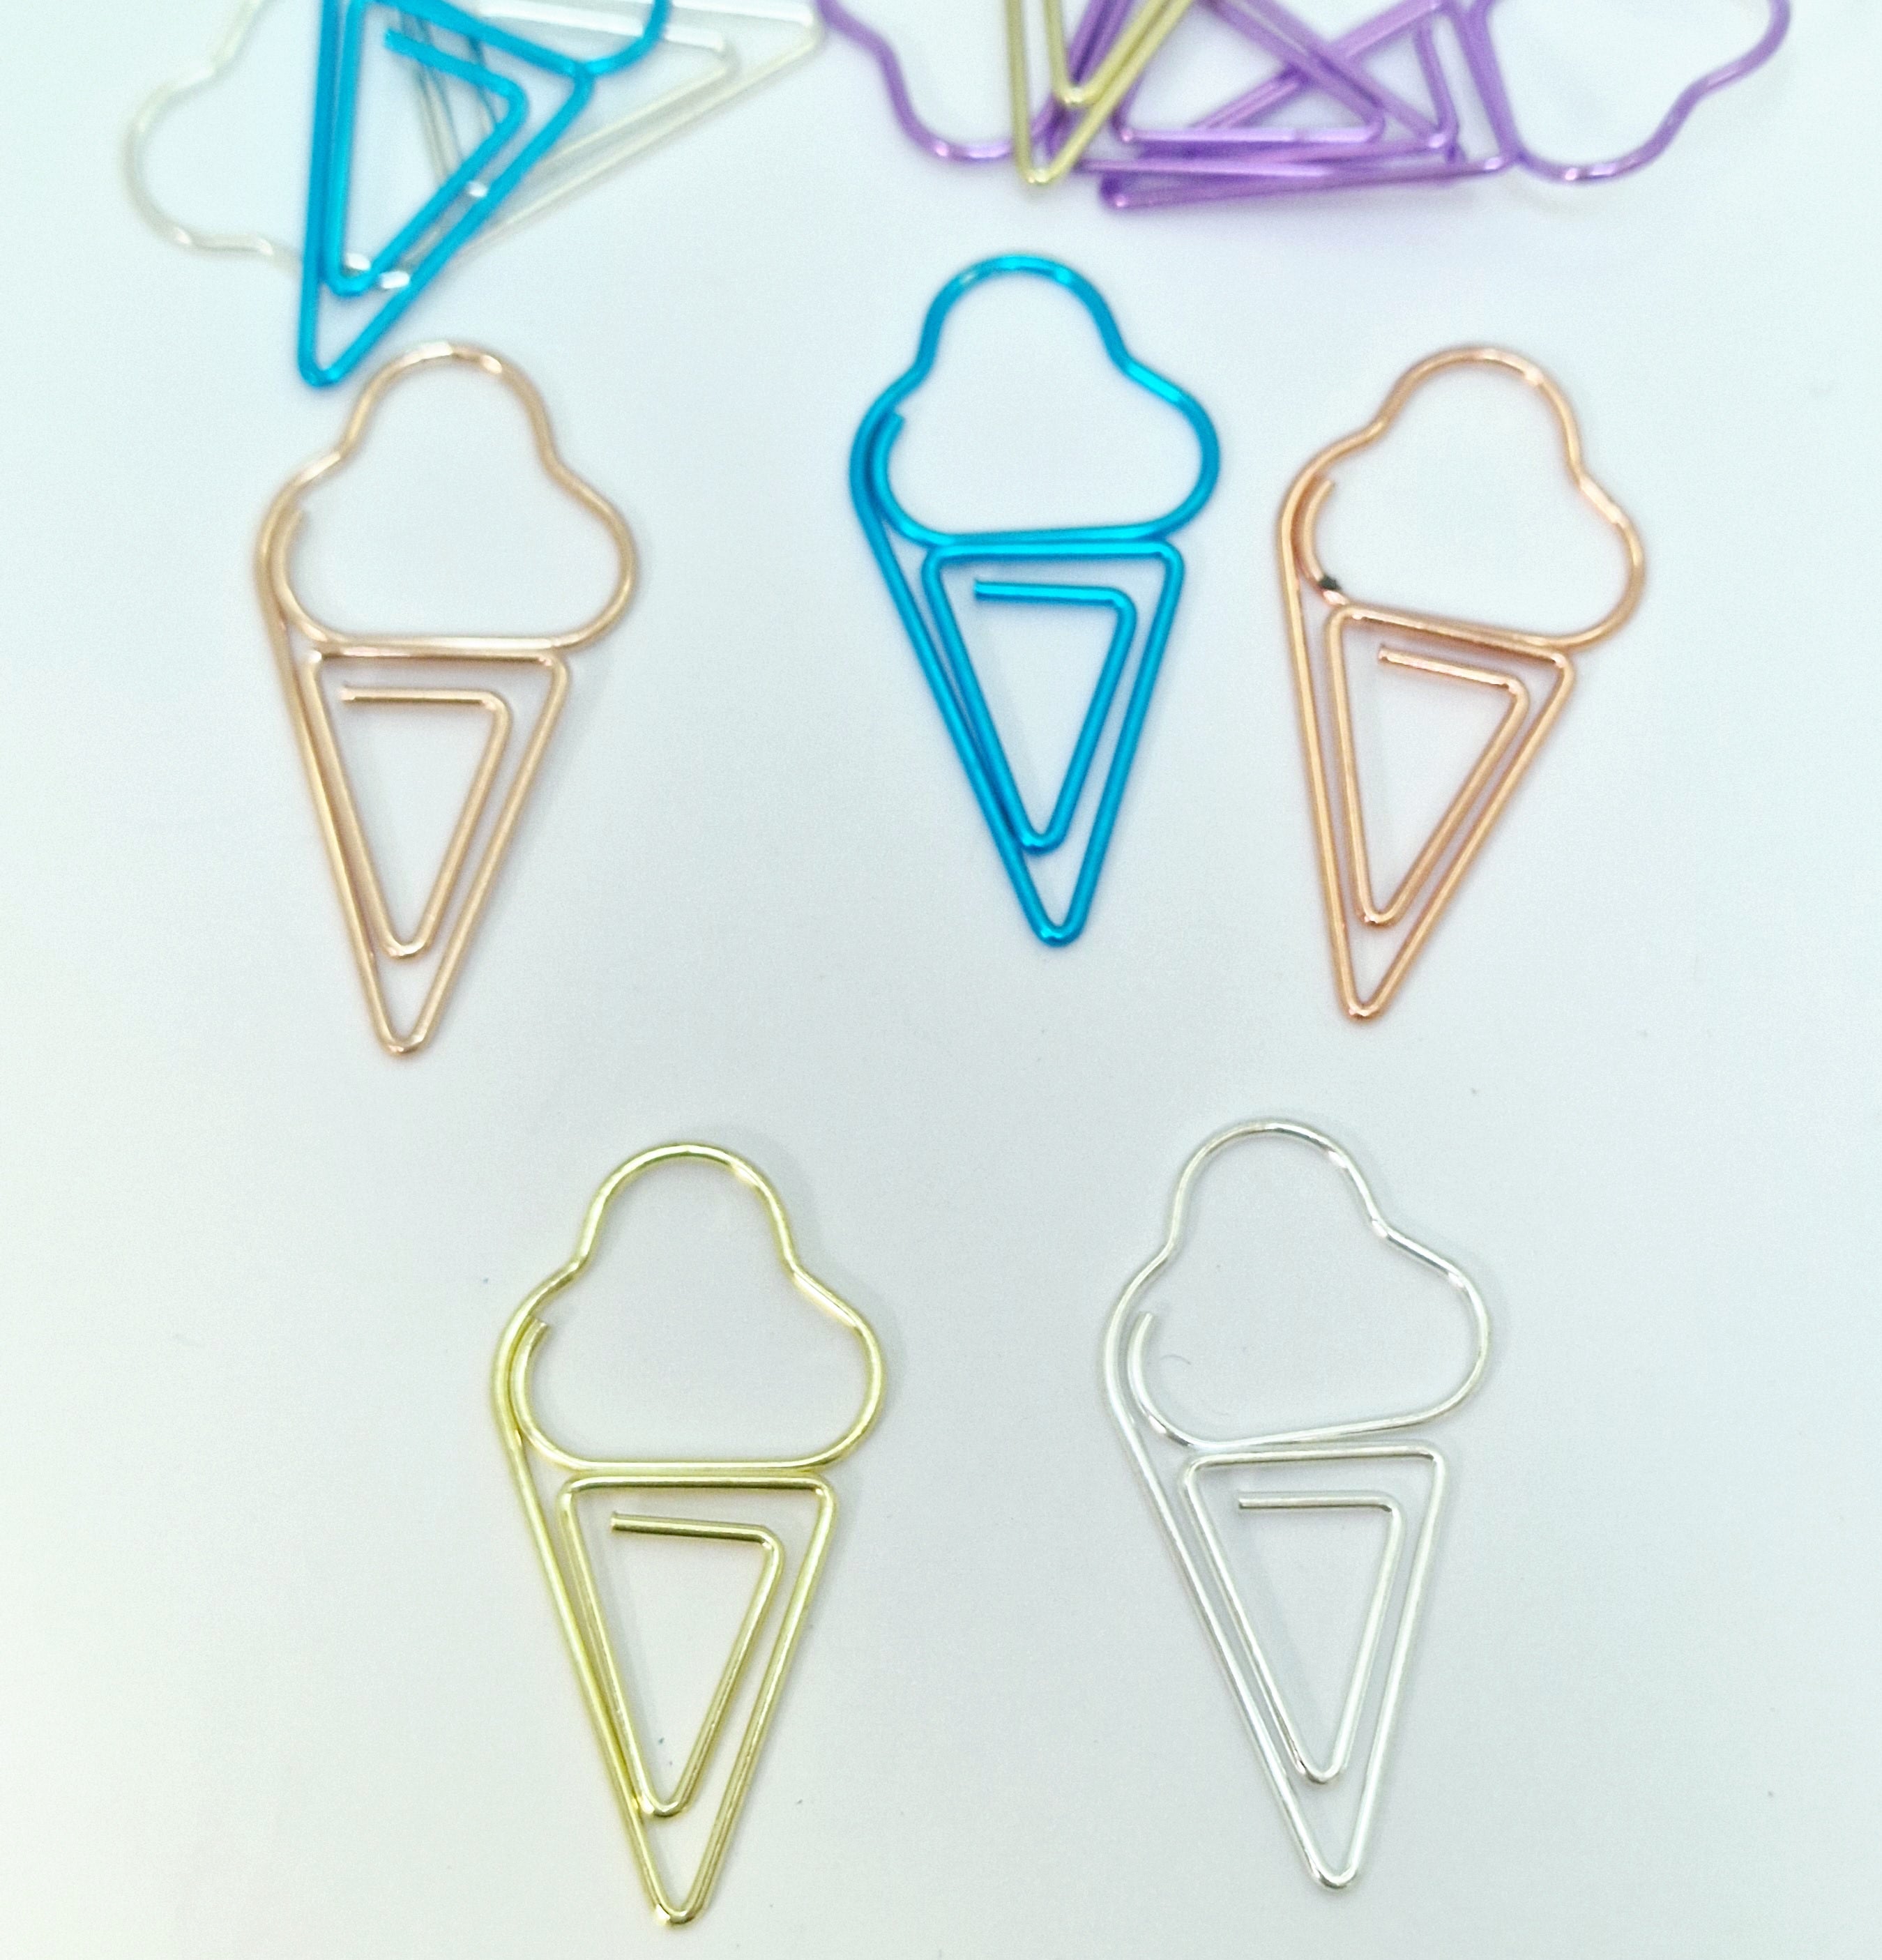 MajorCrafts 10pcs Mixed Colours Ice Cream Shaped Novelty Metal Paper Clips 37x19mm